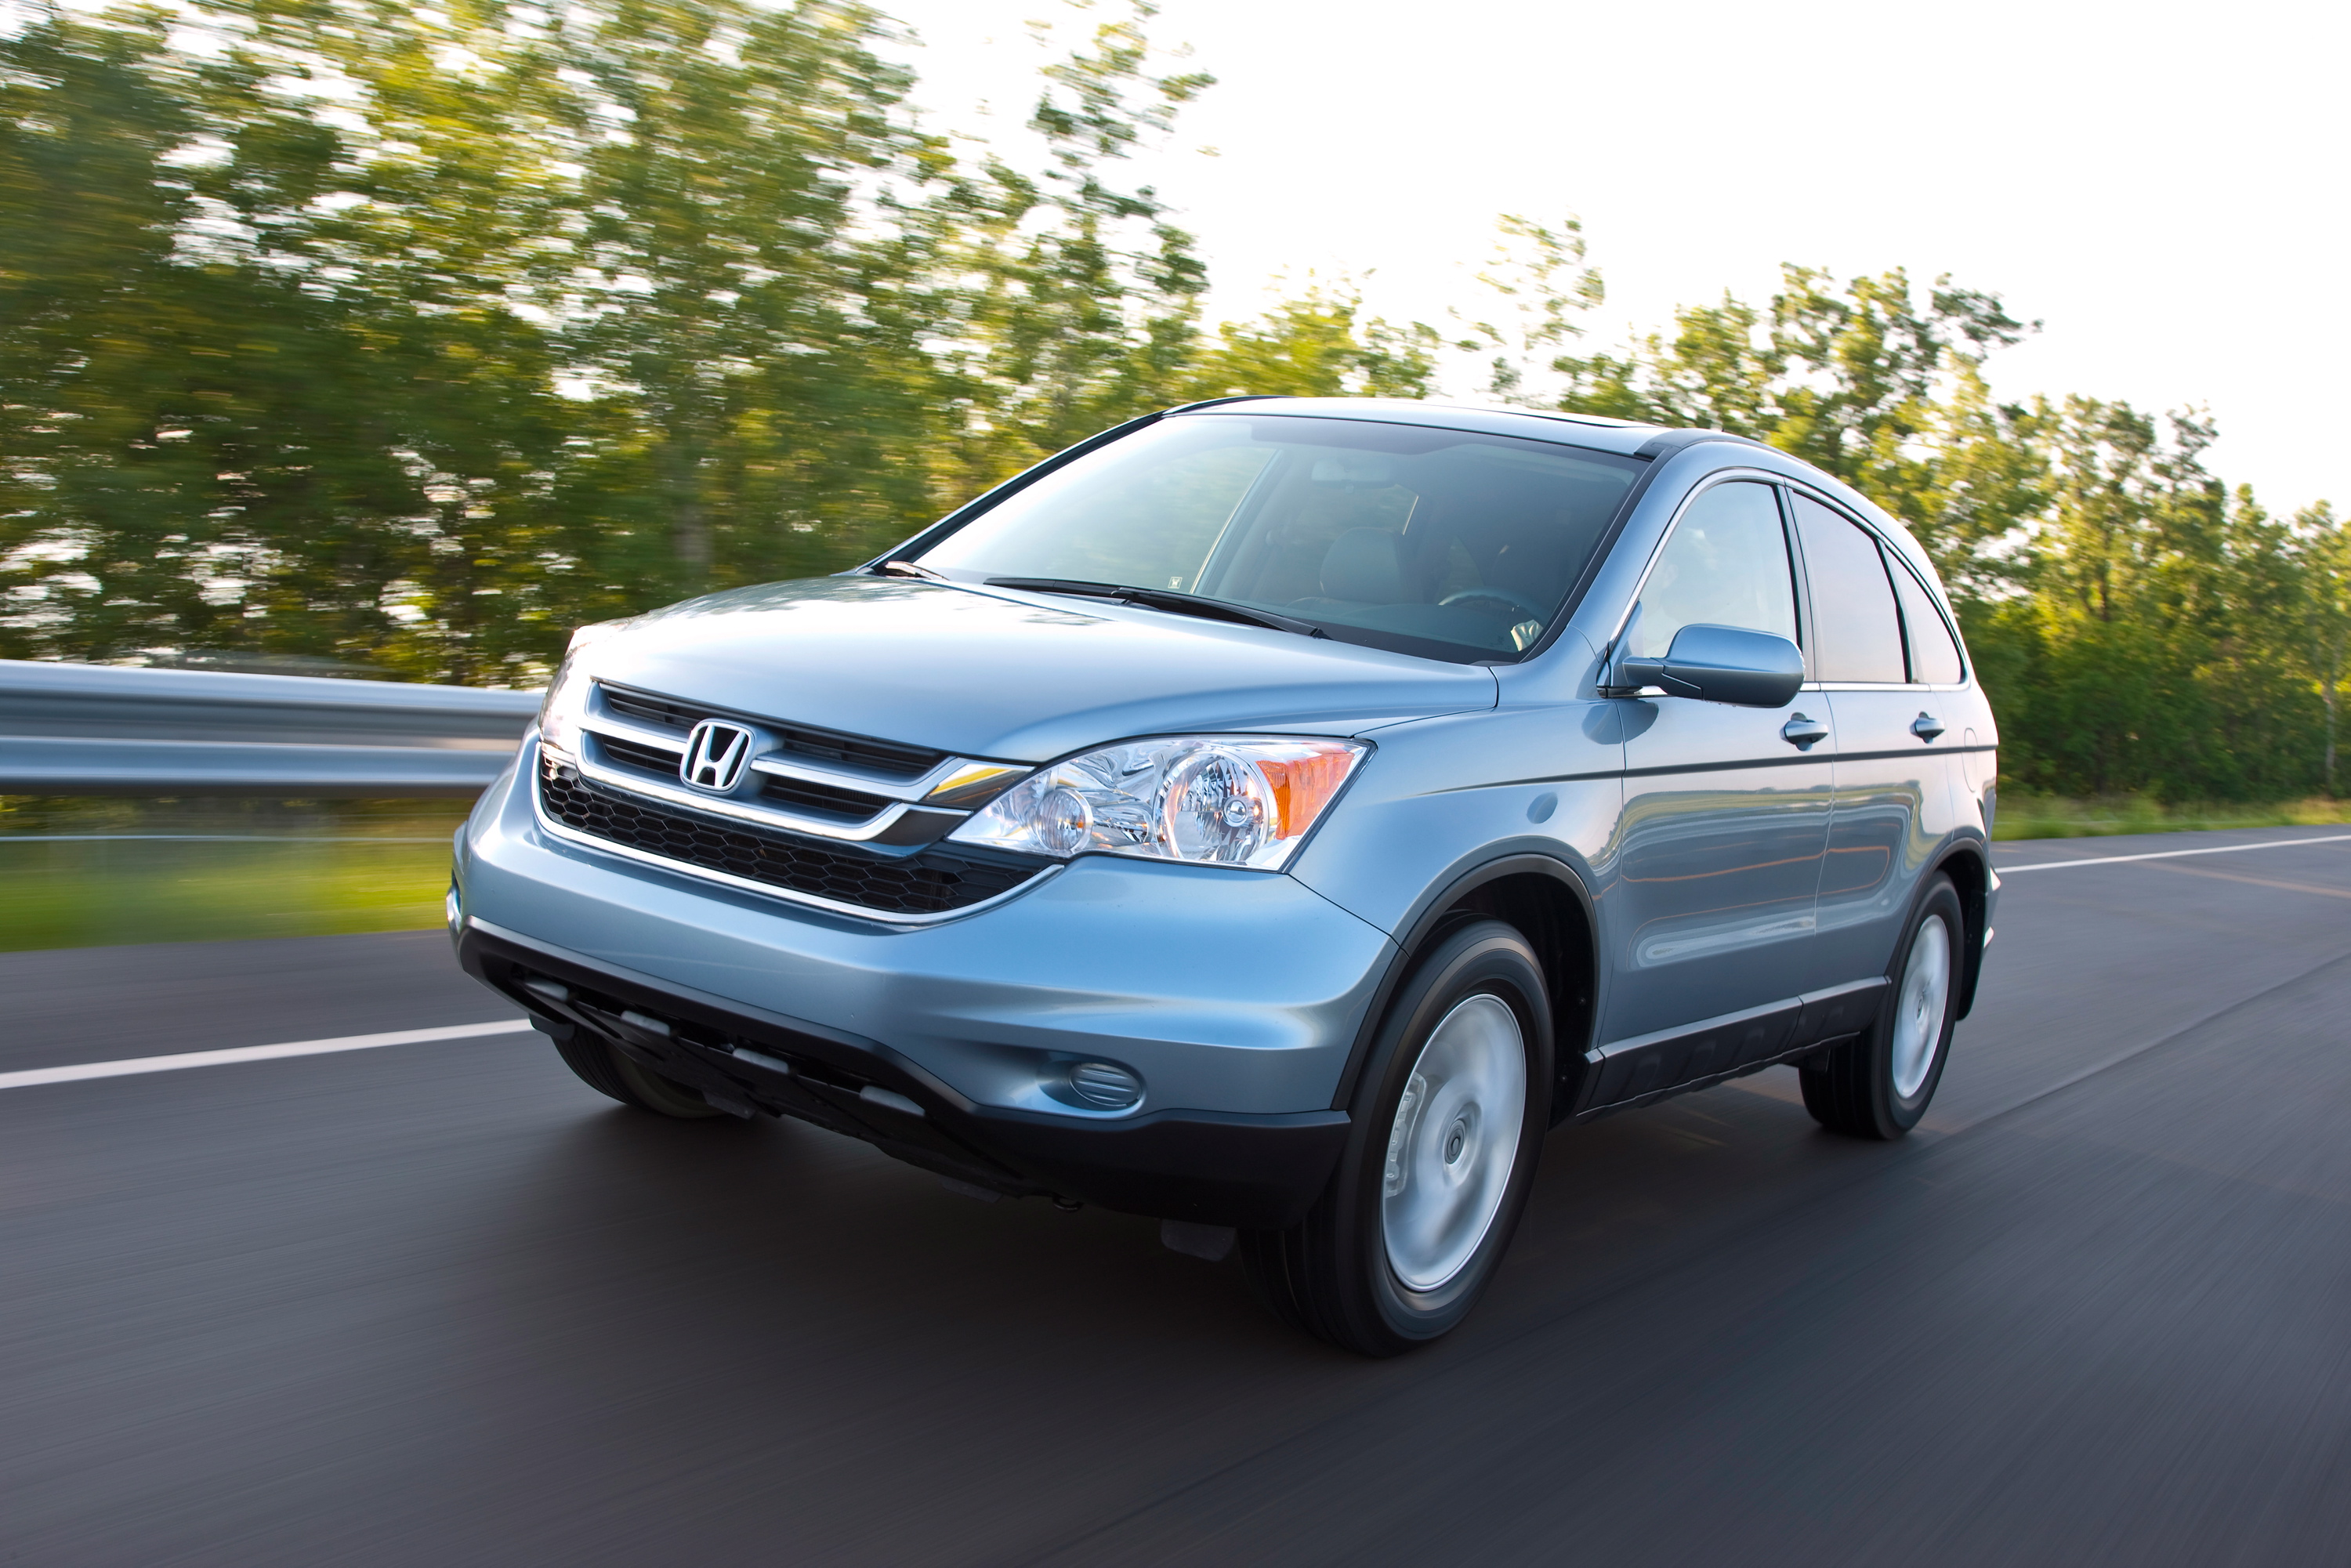 2010 Honda CR-V Review, Pricing, & Pictures